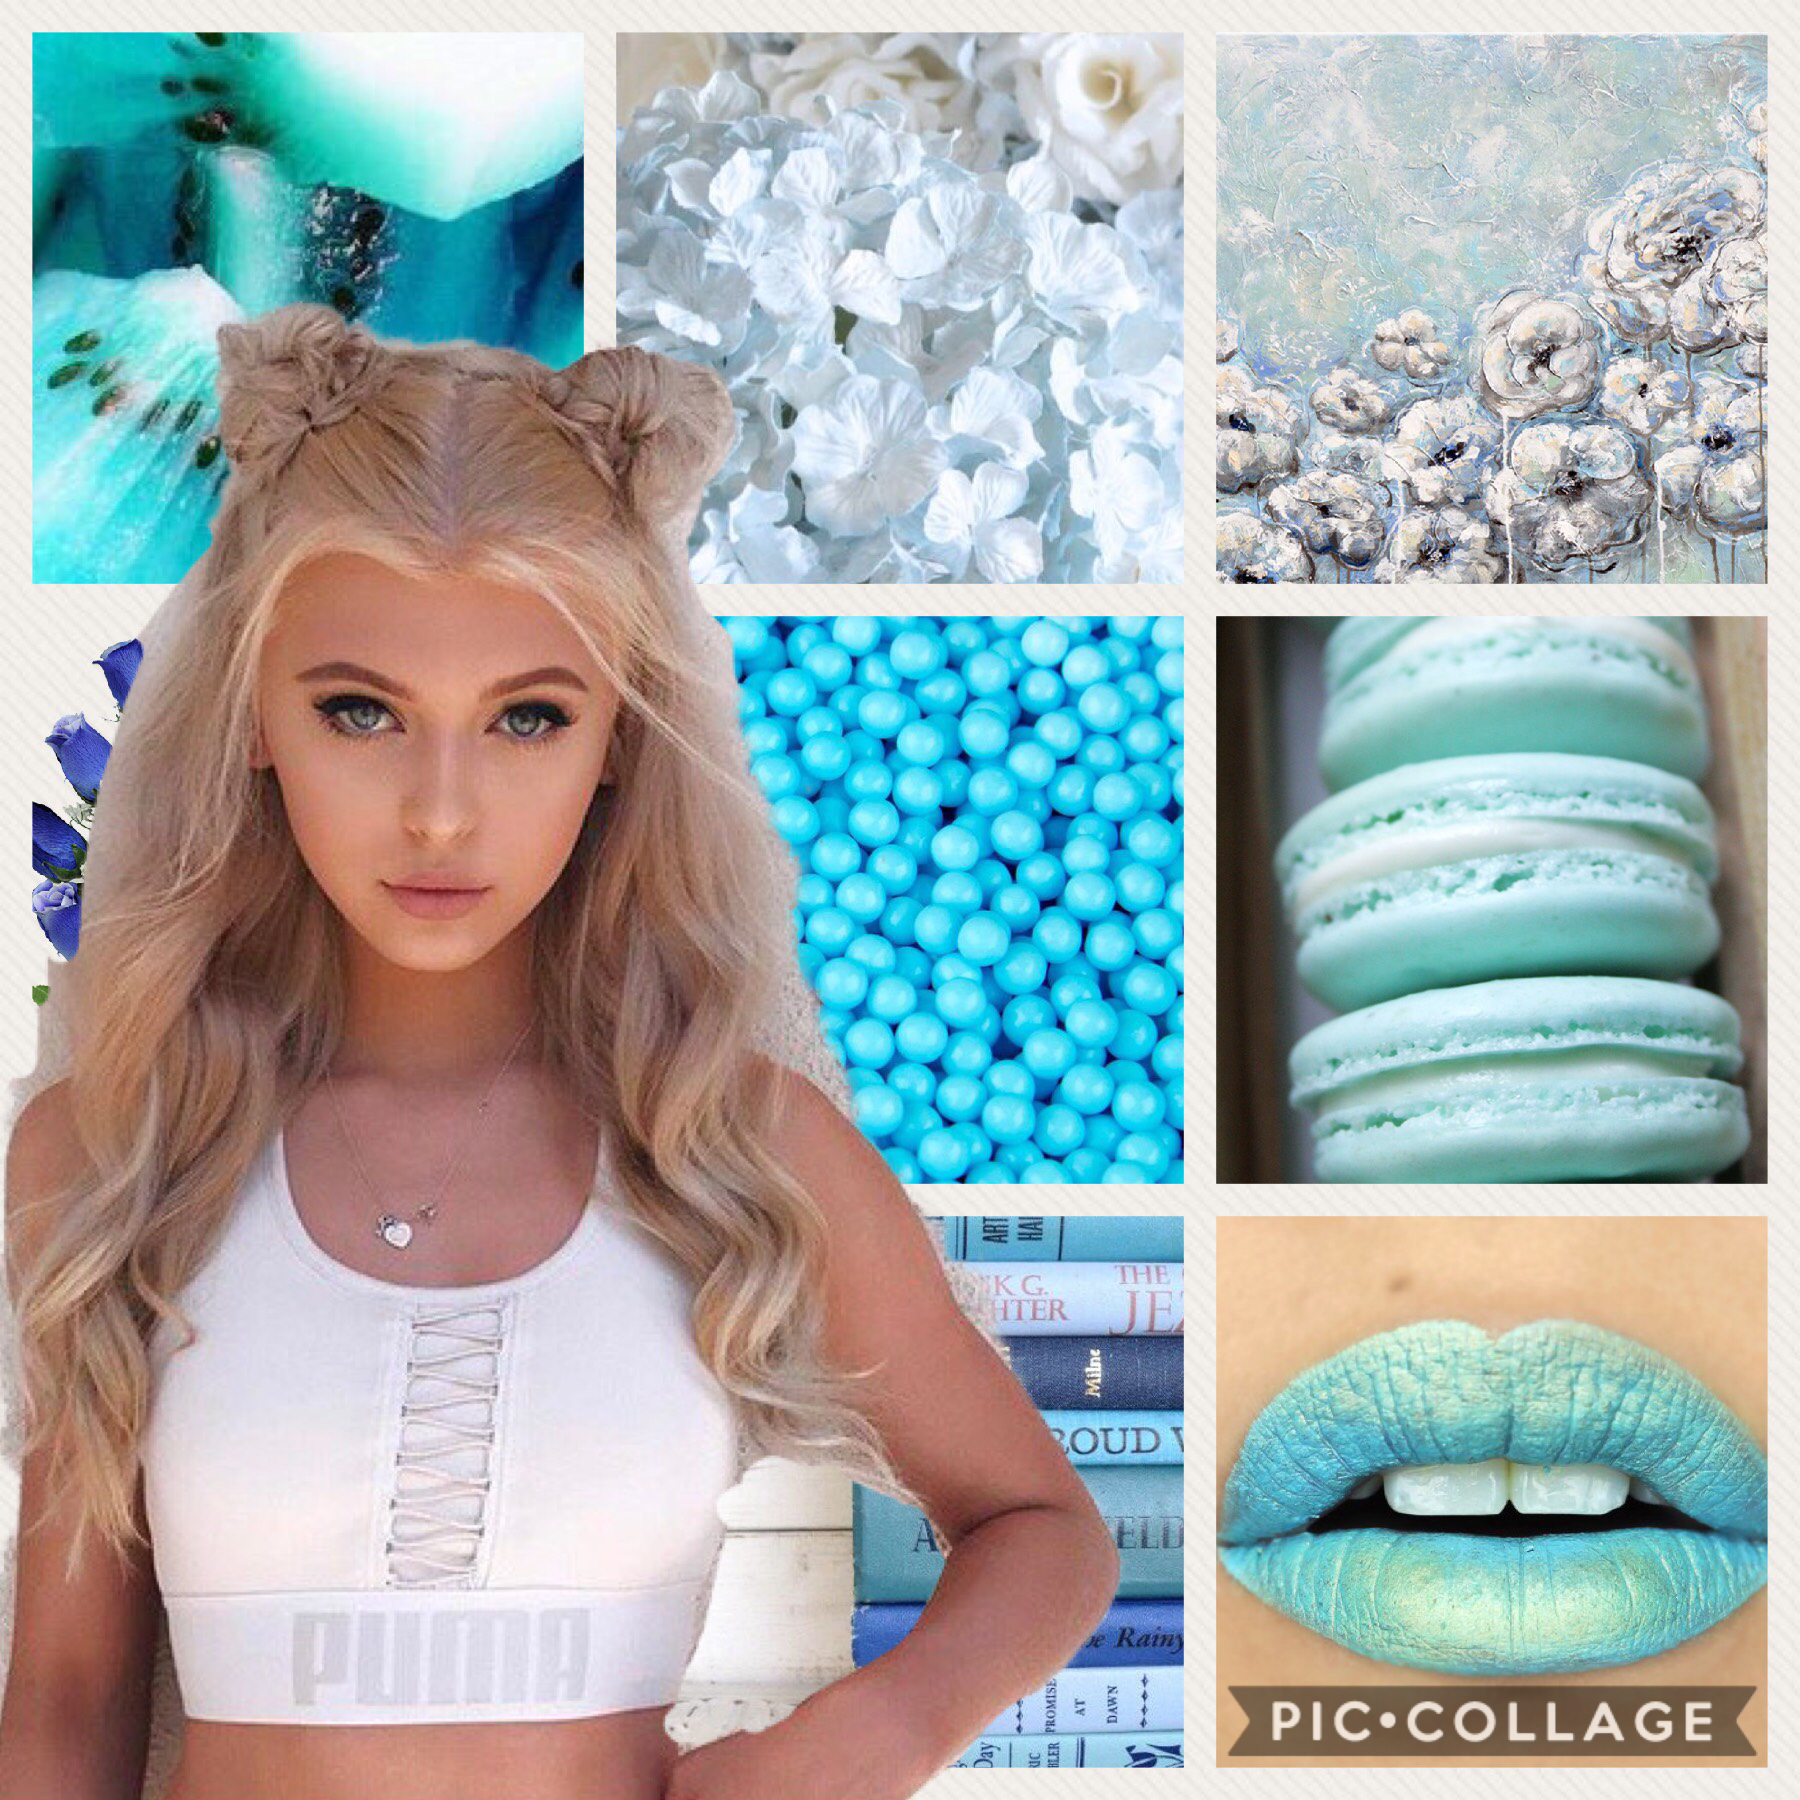 🙌😍❤️TAP❤️😍🙌

THIS THE NEW THEME!!!!AHhhhhhhh 😍😍😍😍😍comment ppl I want me
To do I will be doing 8 colllges !!!Qotd:do u like this ???Aotd YAS!!!!!!😍😍🙌🙌🙌🙌🙌🙌🙌🙌❤️❤️Byee love u beautifuls~Foxygirl22 